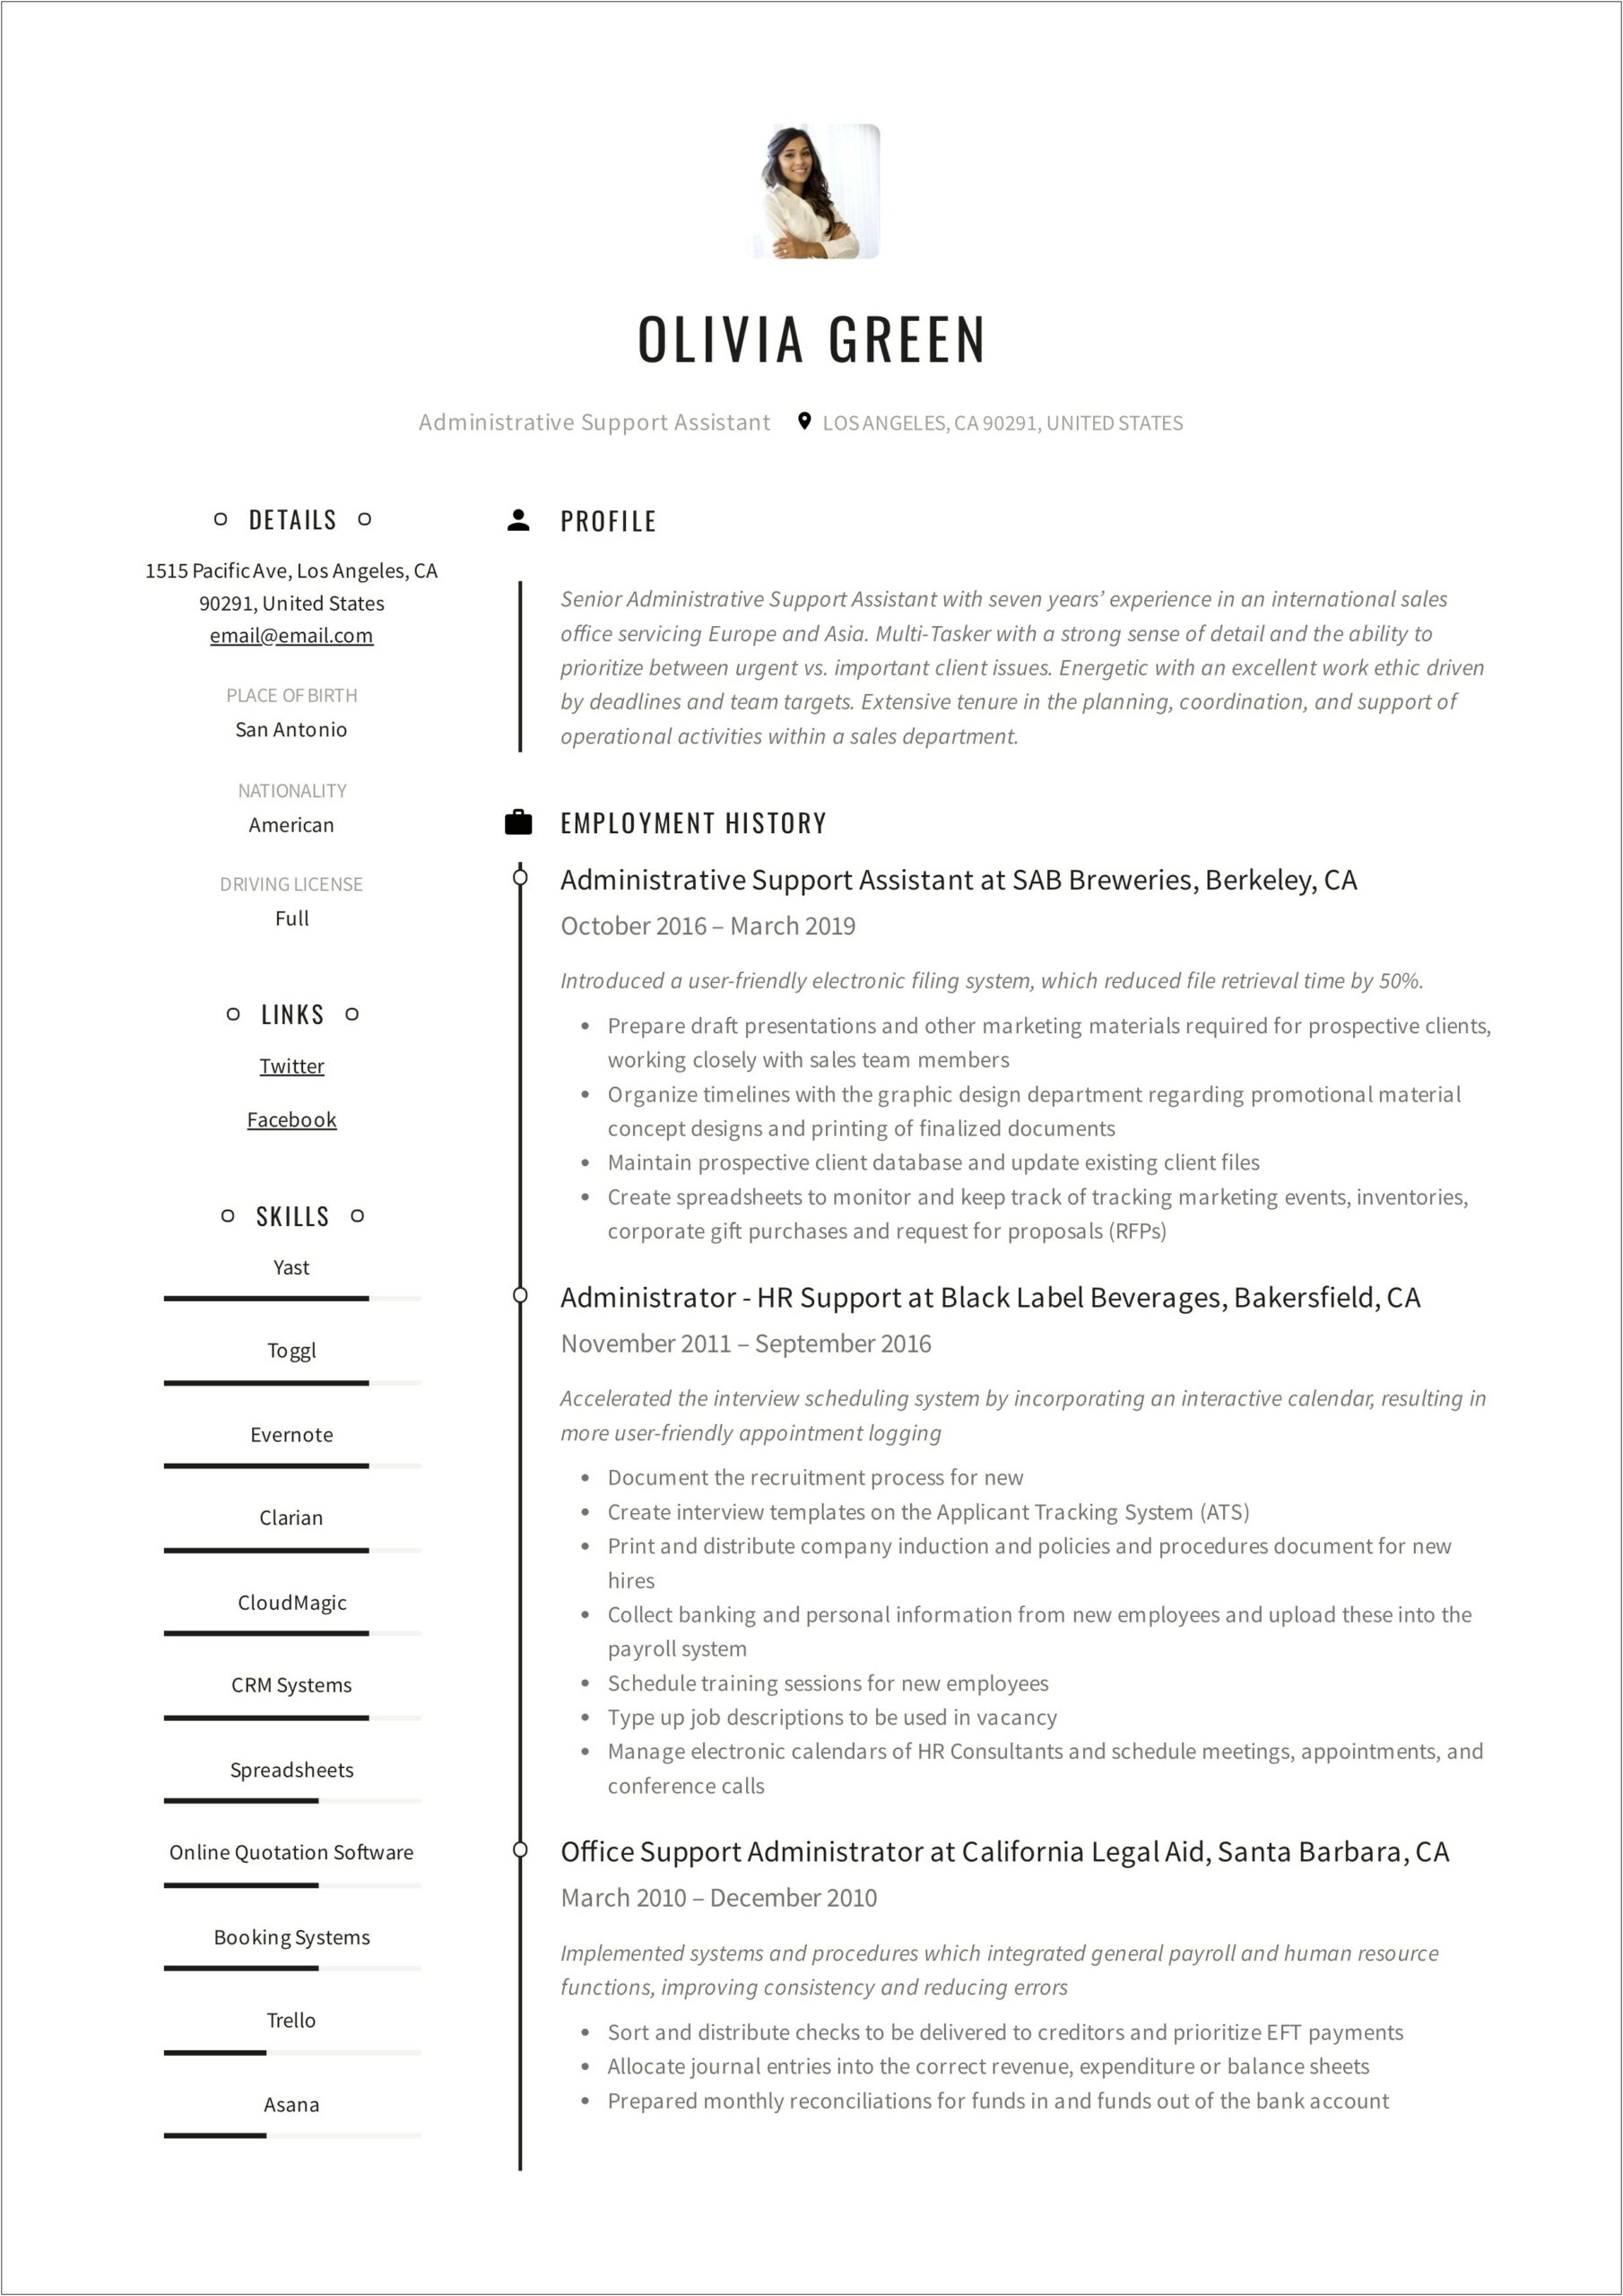 Technical Skills For Administrative Assistant Resume